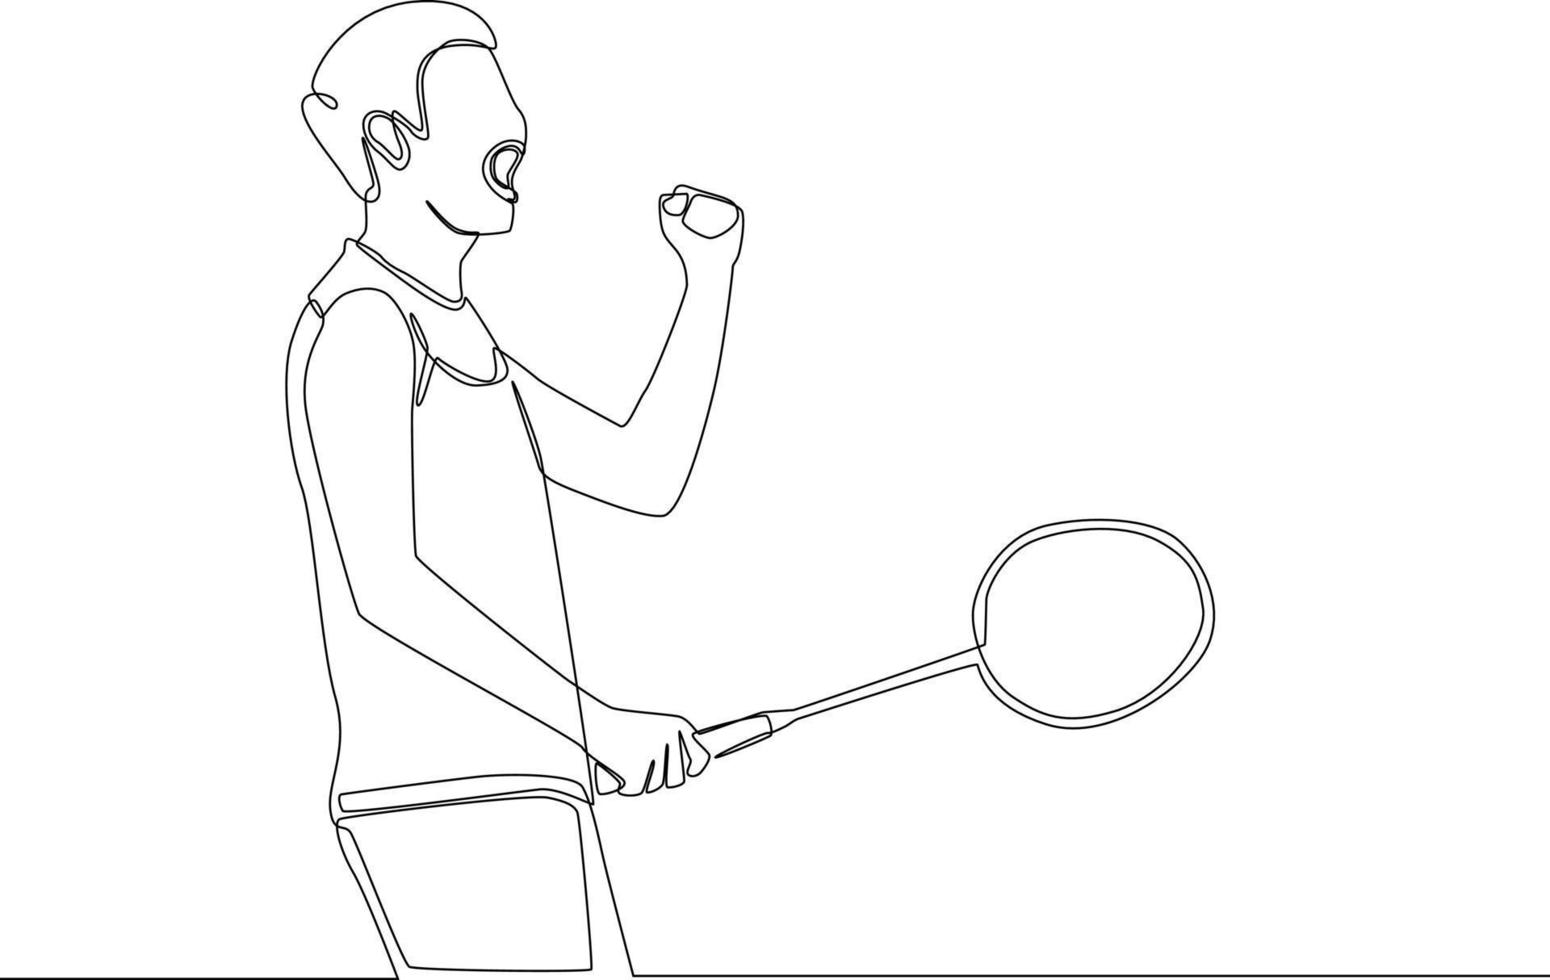 Continuous one line drawing Young man after playing badminton standing as winner. Single line draw design vector graphic illustration.